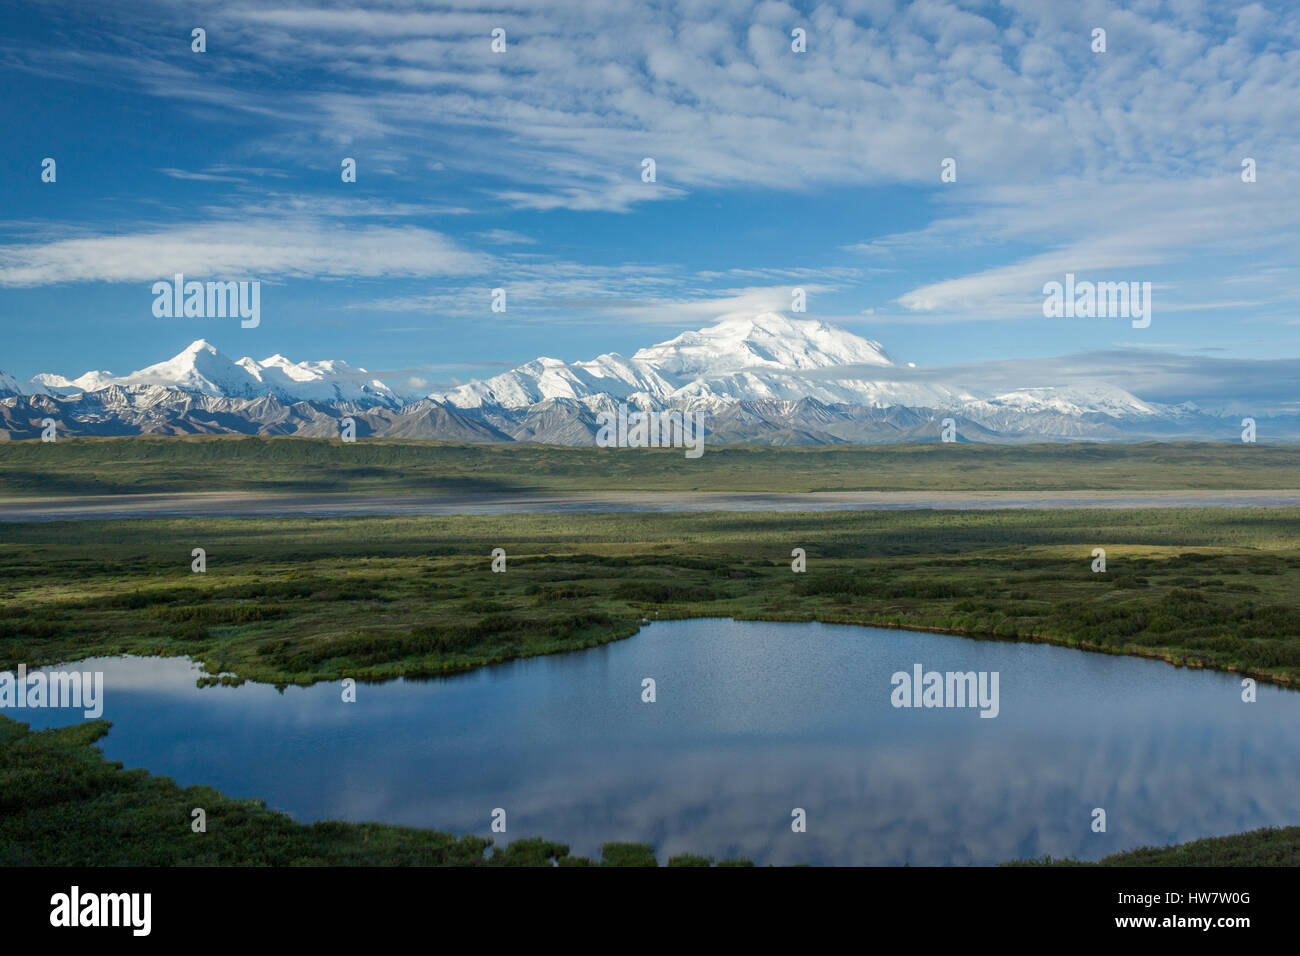 View of the Alaska Range and Mckinly Bar River from a kettle pond, Denali National Park, Alaska. Stock Photo